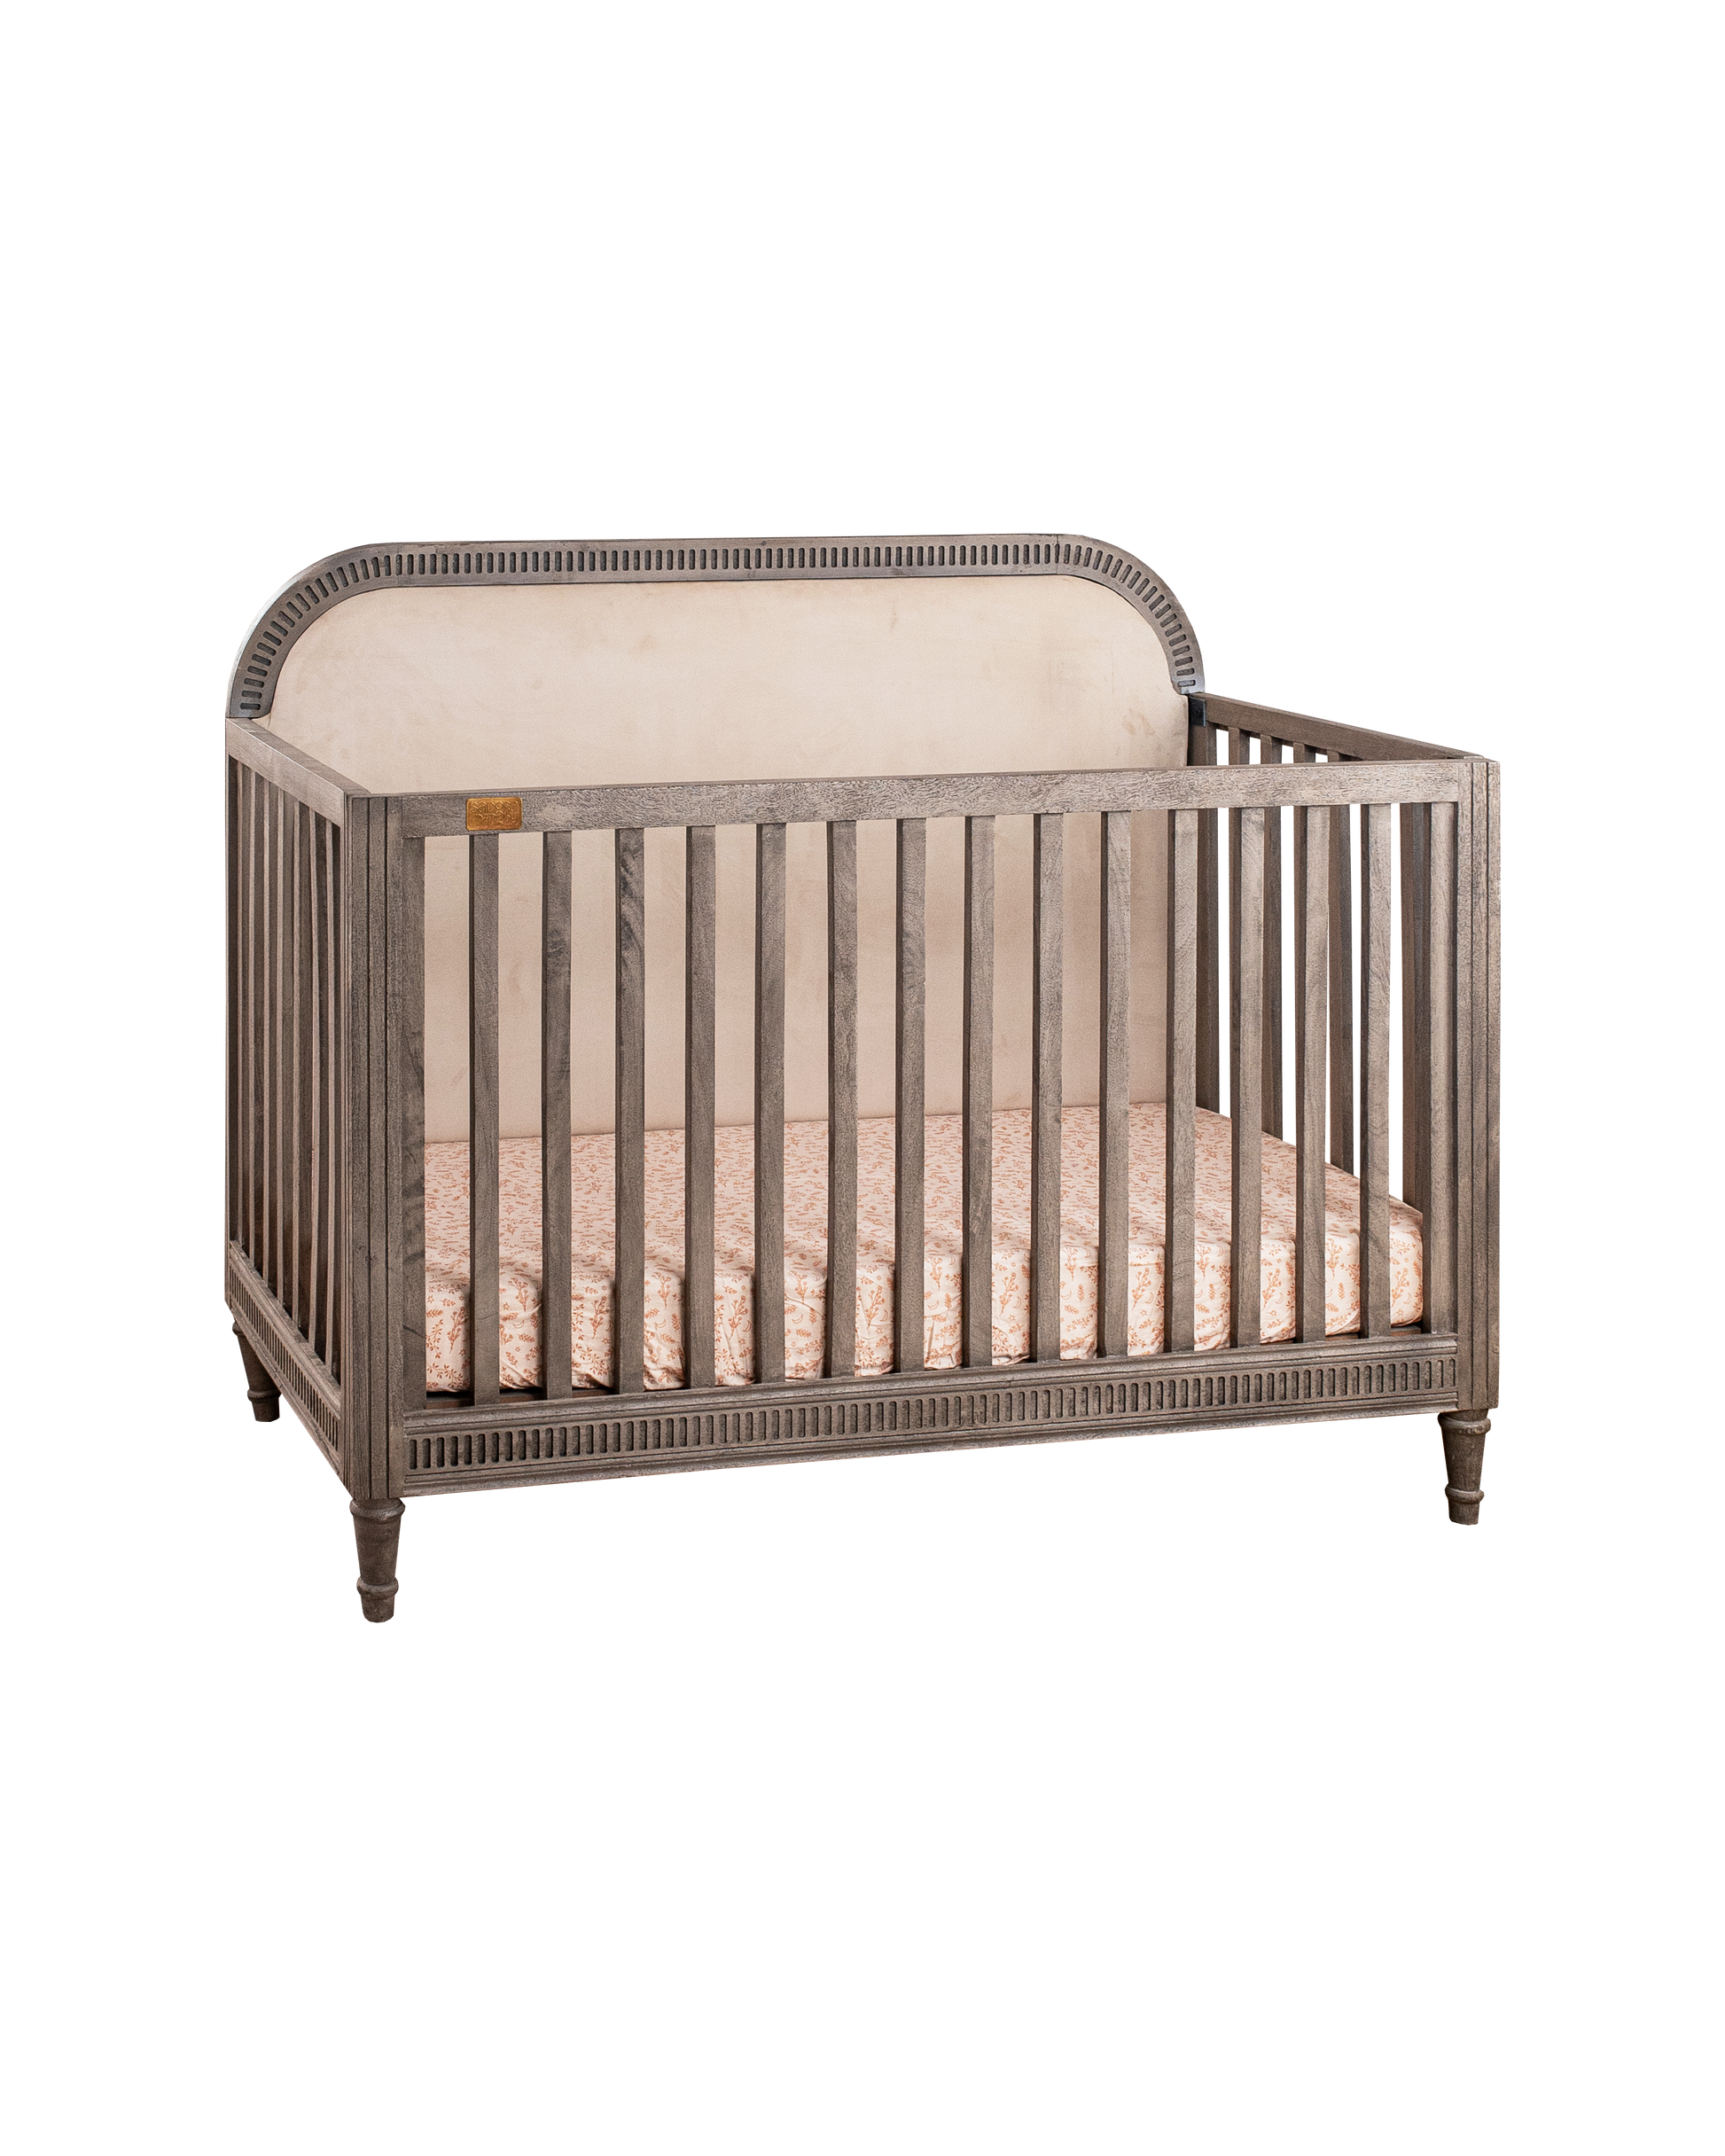 Buy Wooden Baby Cot With Headboard - Ash Grey Online - SkilloToys.com